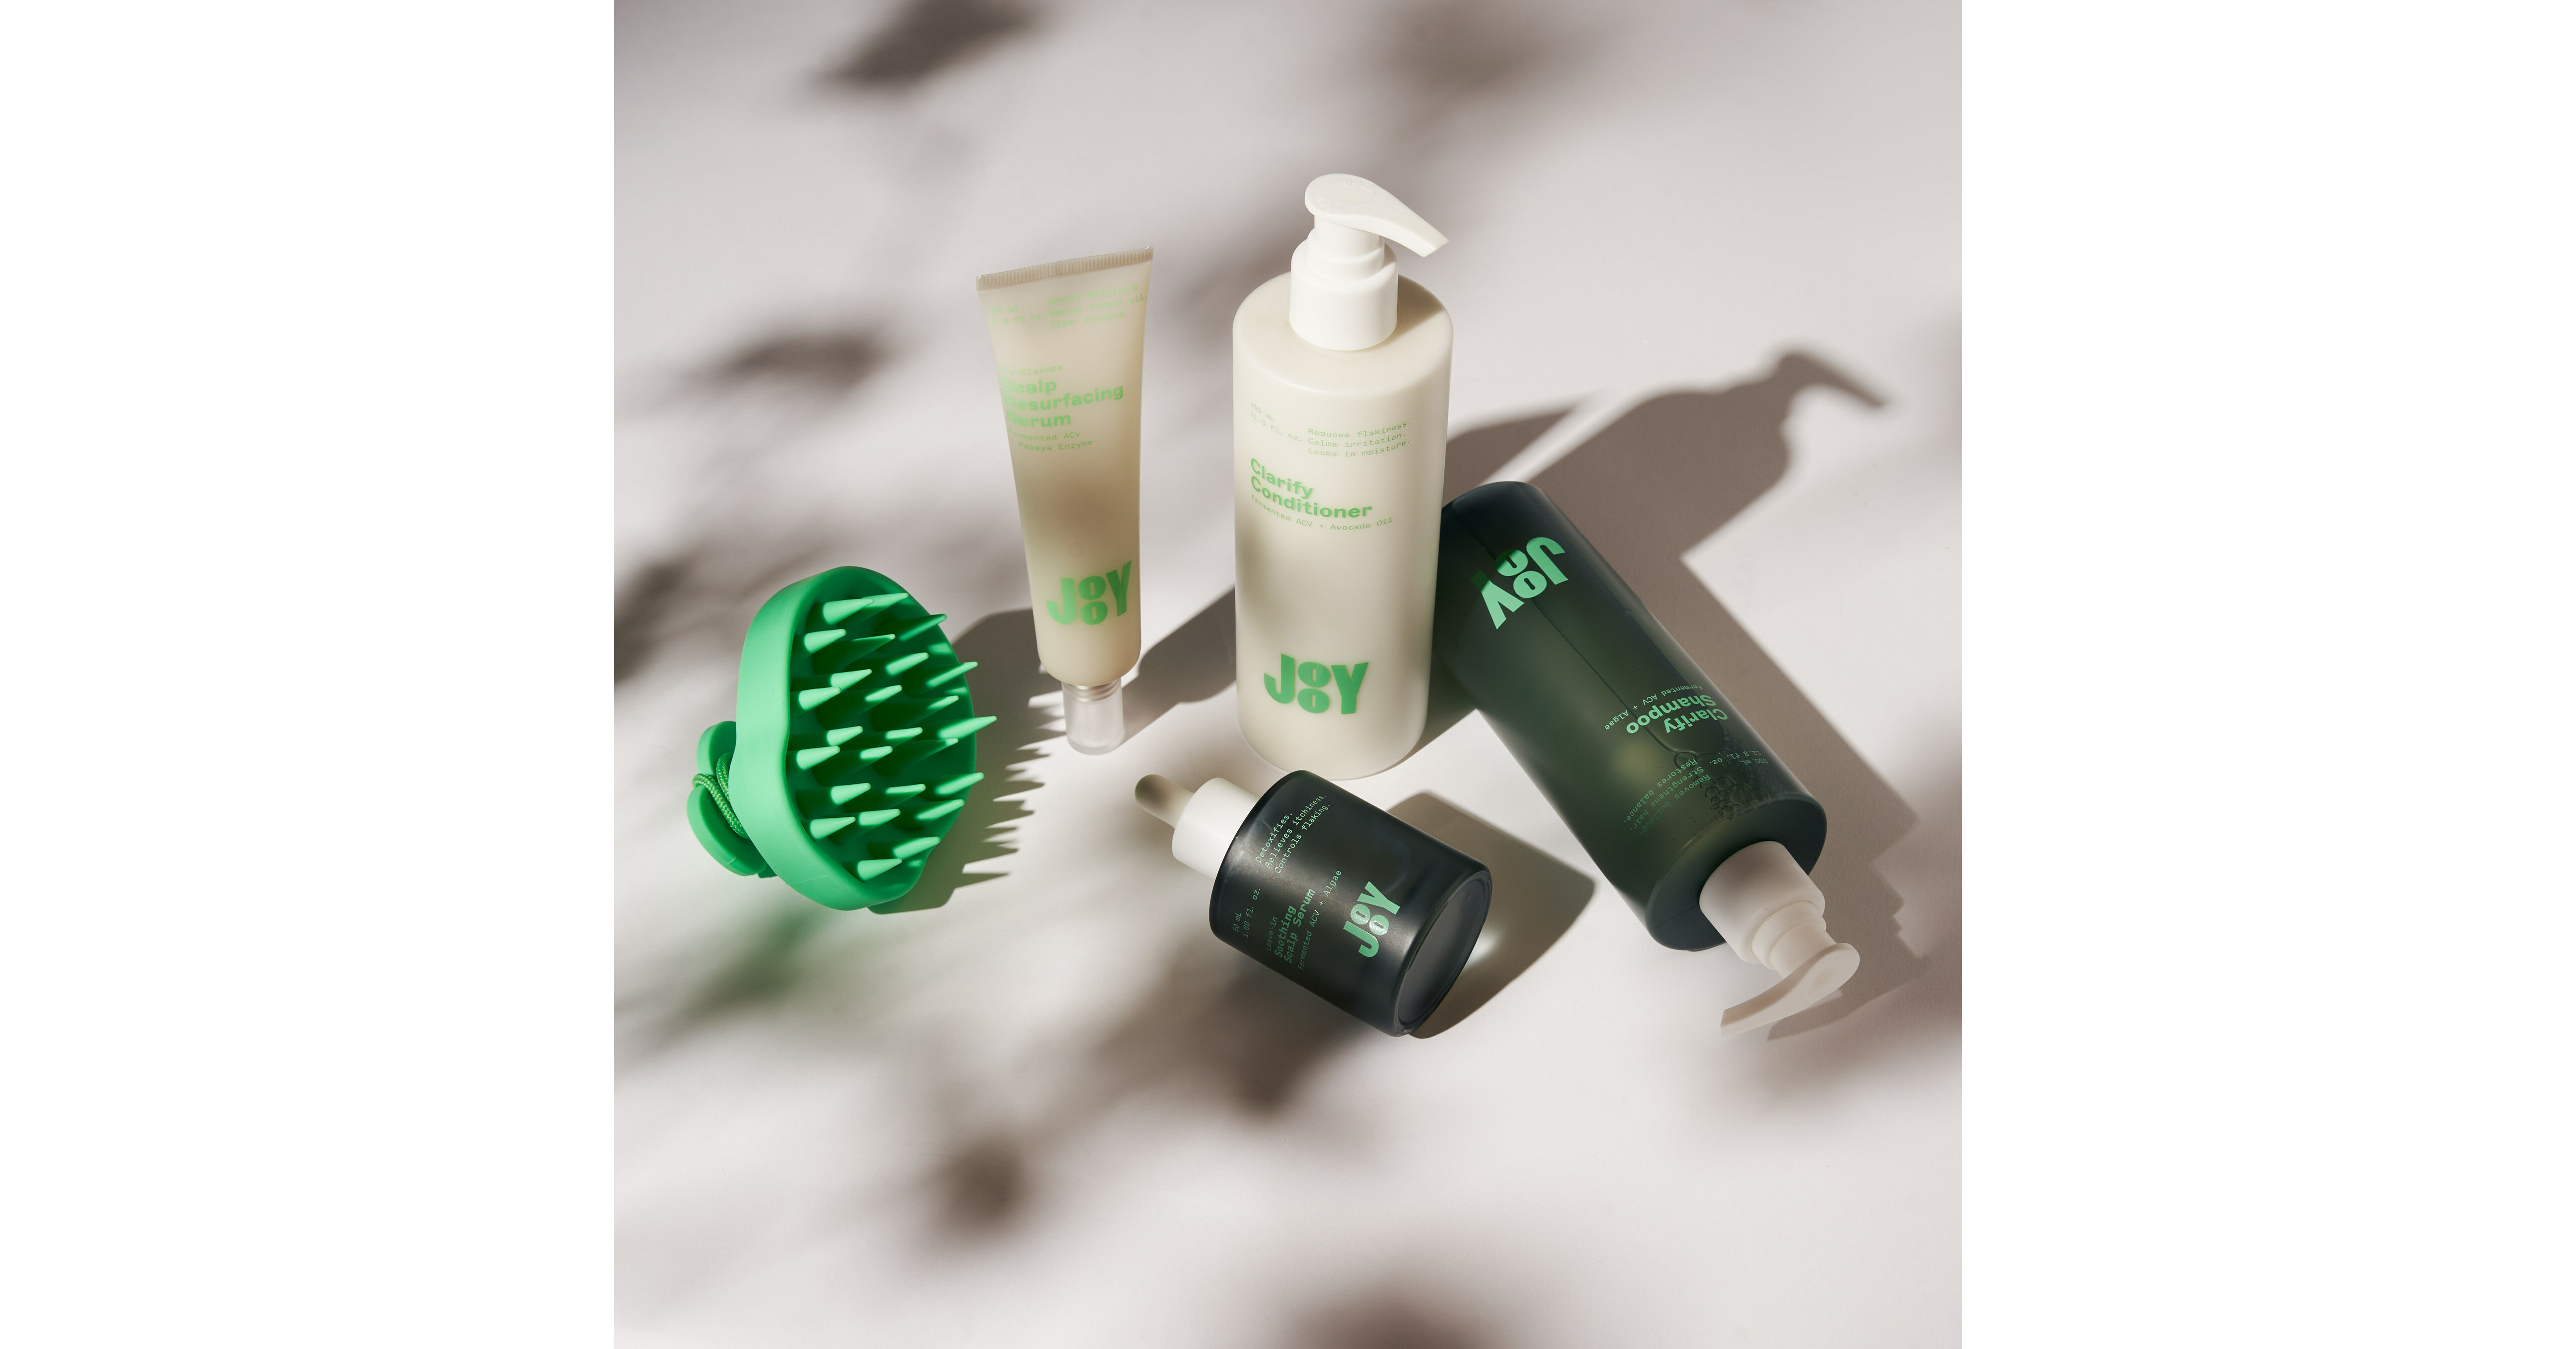 Introducing JooY, A NEW Innovative Scalp Care Brand Powered by Fermented Superfoods and Rooted in Asian Herbal Therapy